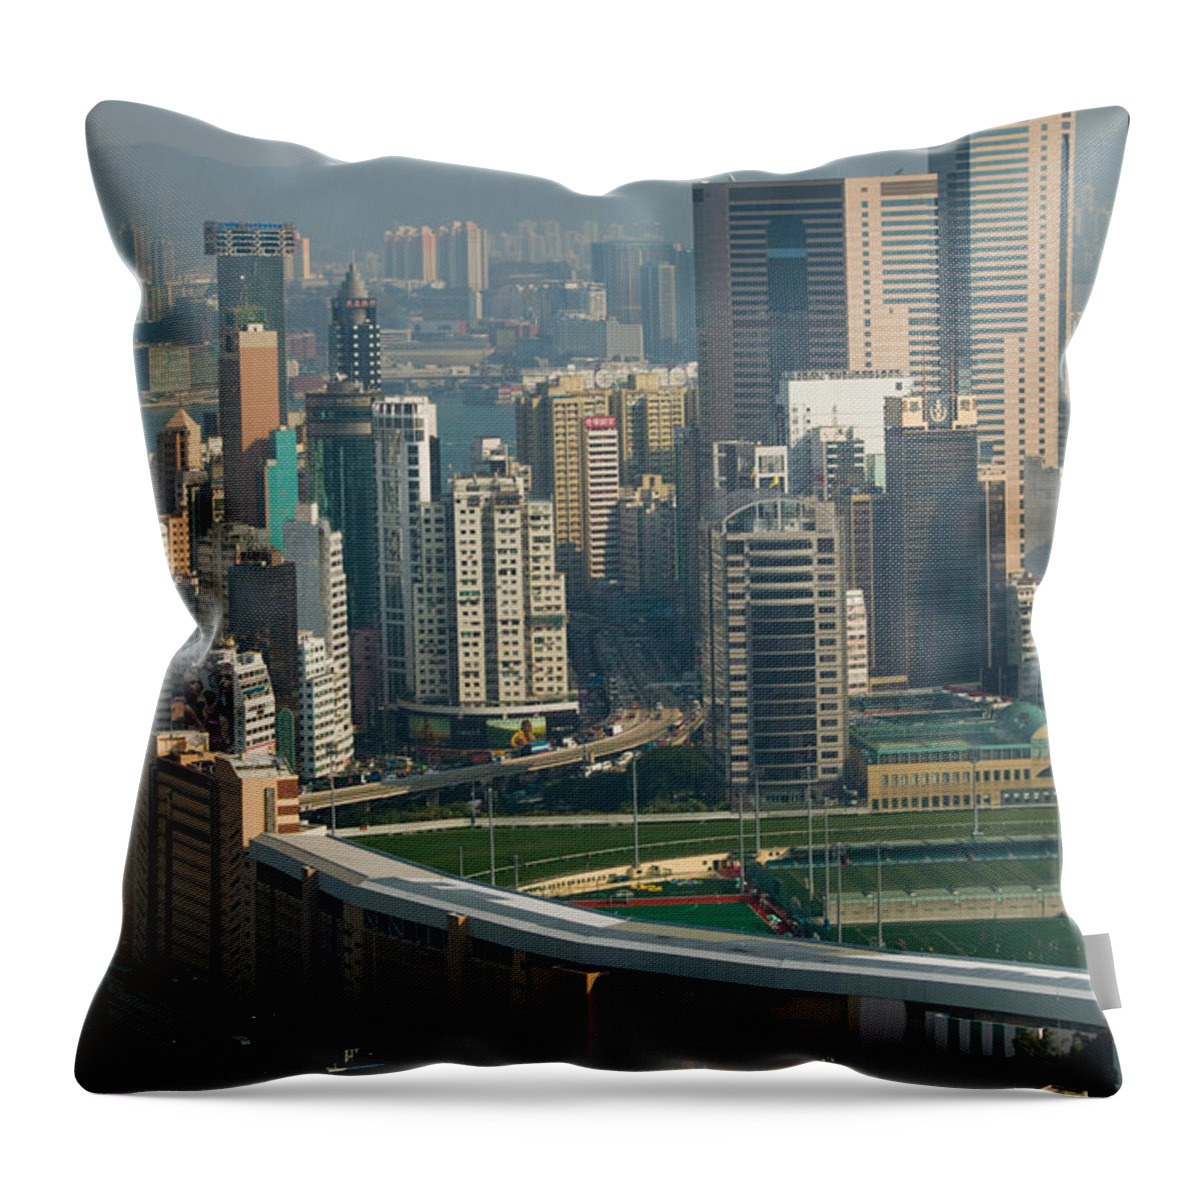 Photography Throw Pillow featuring the photograph High Angle View Of A Horseracing Track by Panoramic Images